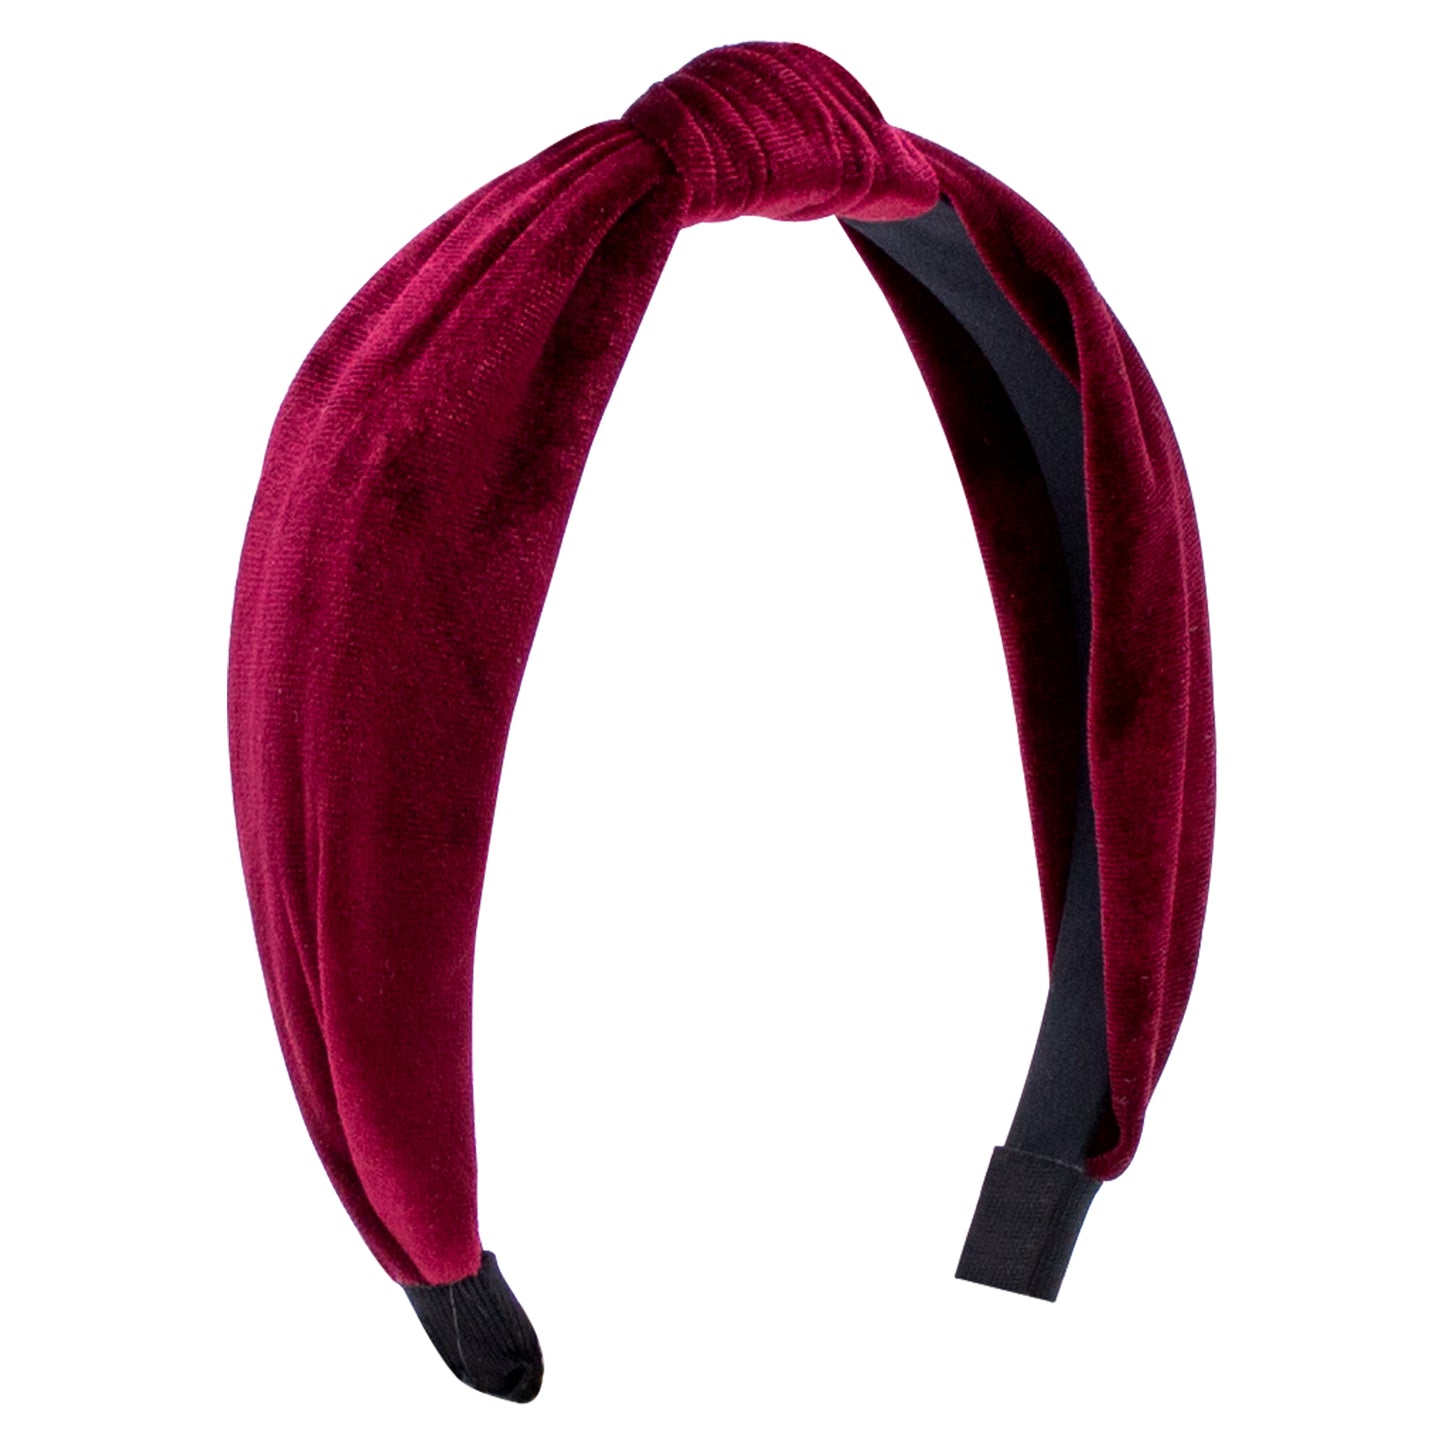 Wee Ones Velvet-wrapped Headband with Knot